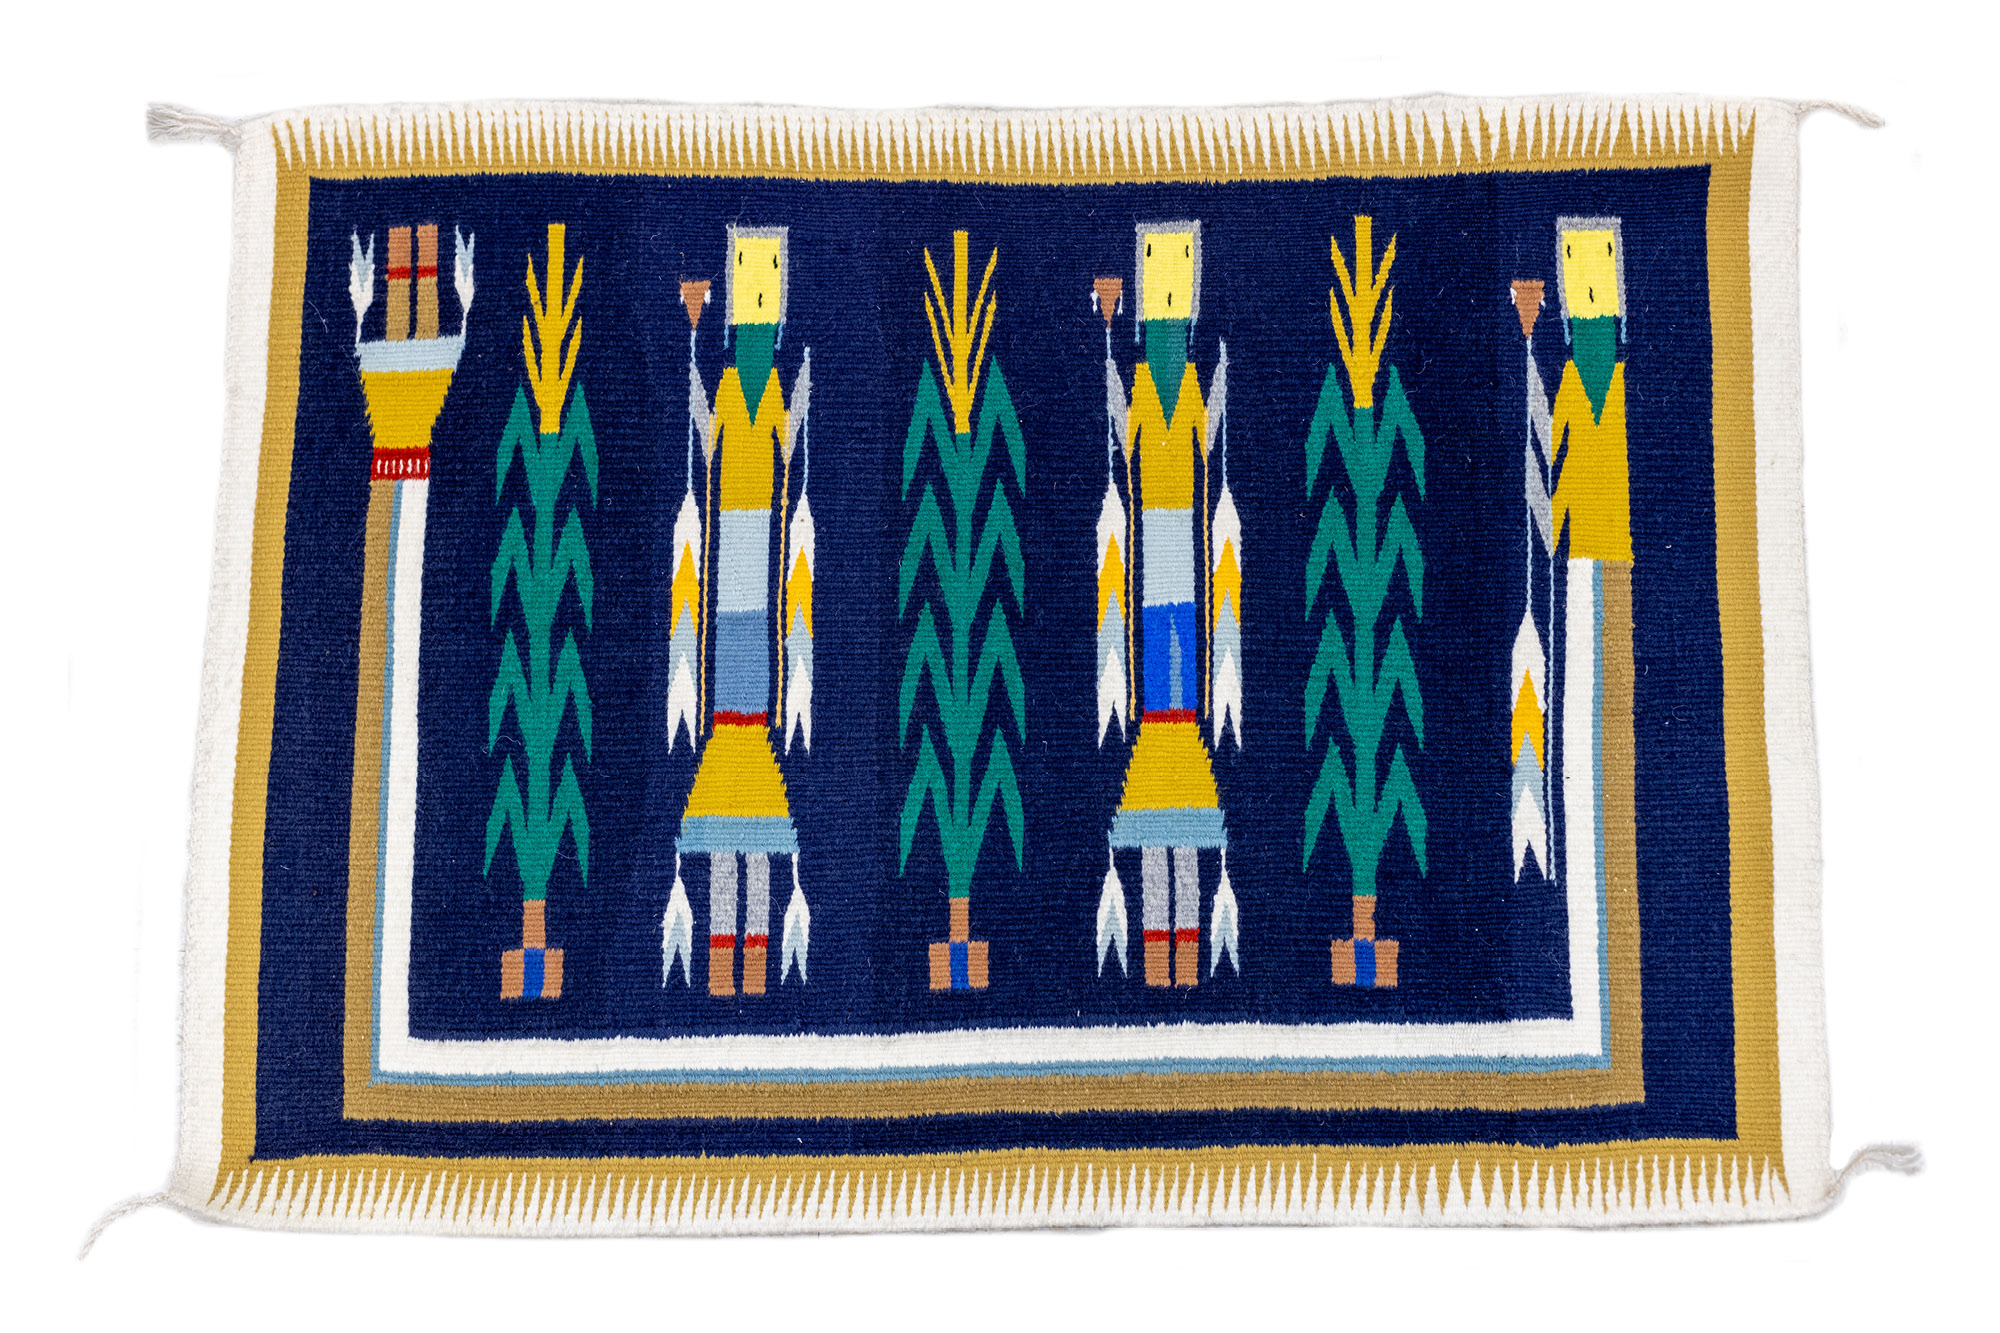 Photo of a rug that is part of the art show titled "Diné Textiles."